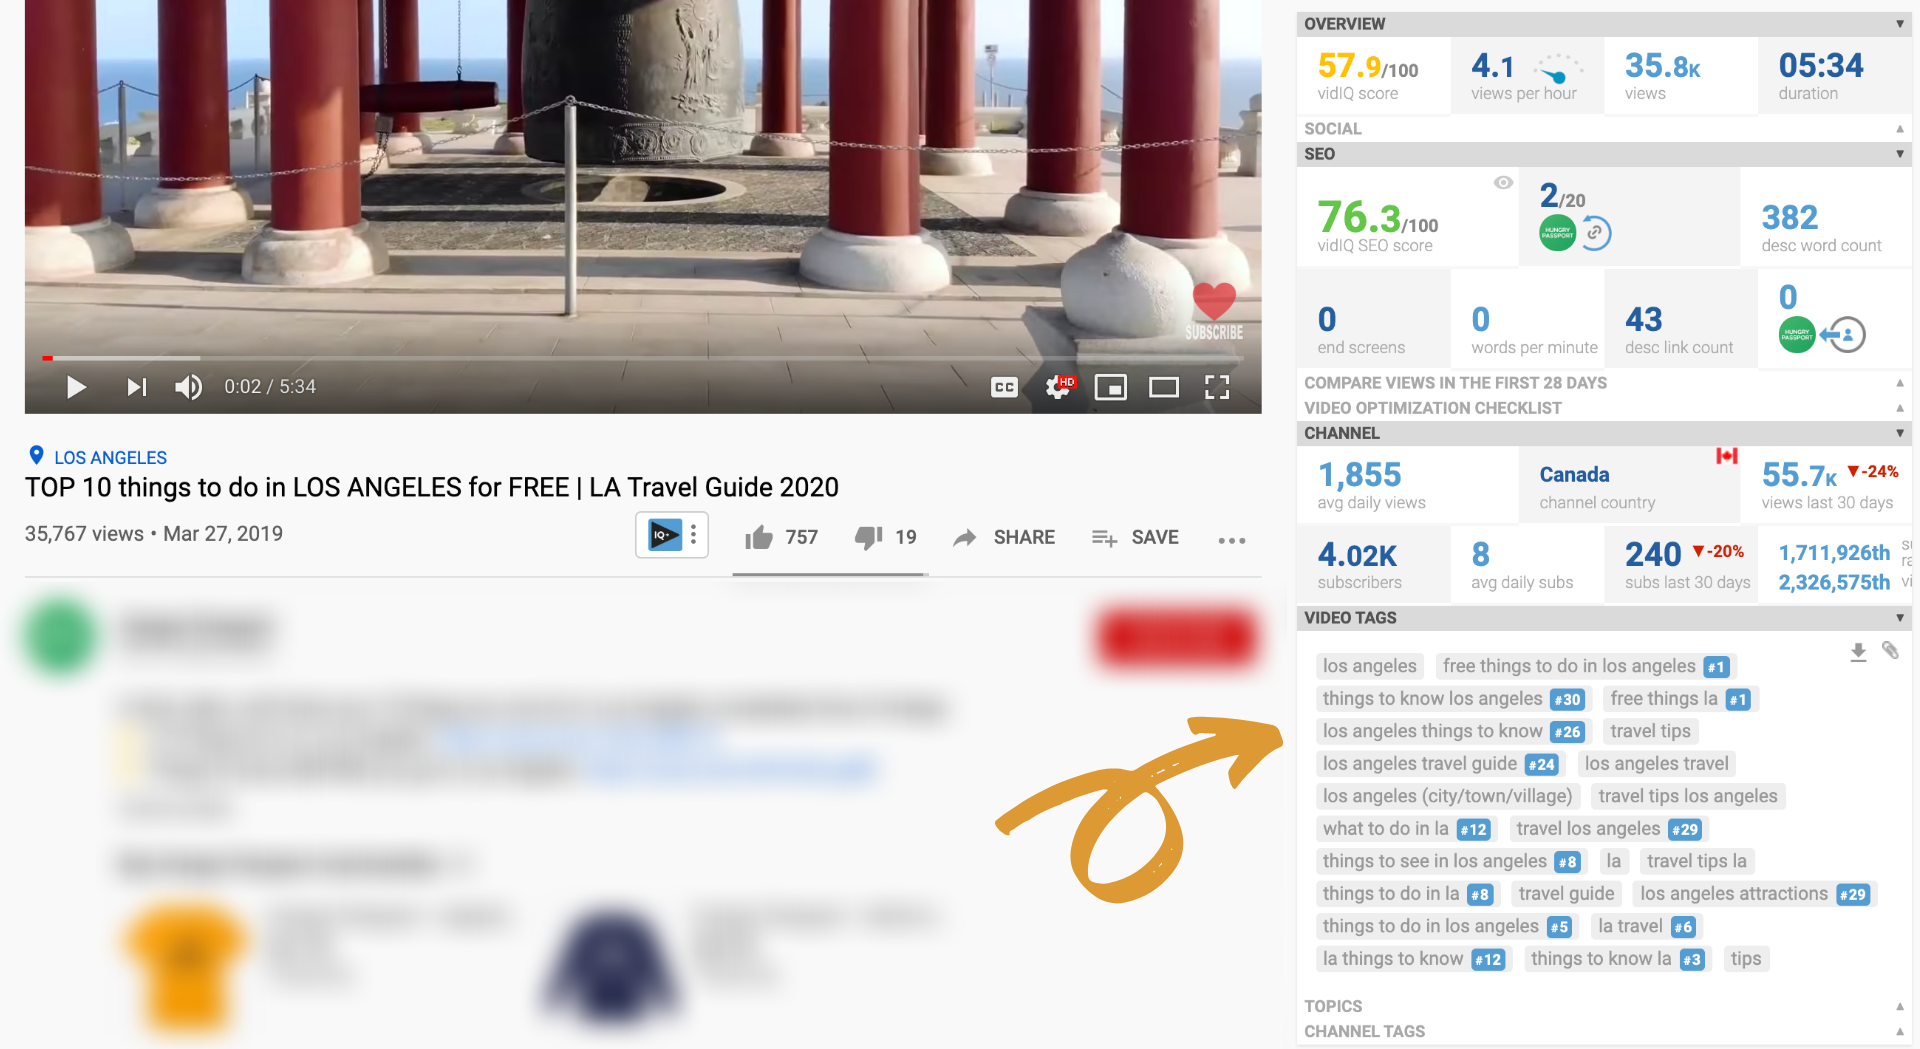 SEO For YouTube: How To Get More Views On YouTube for Free 5